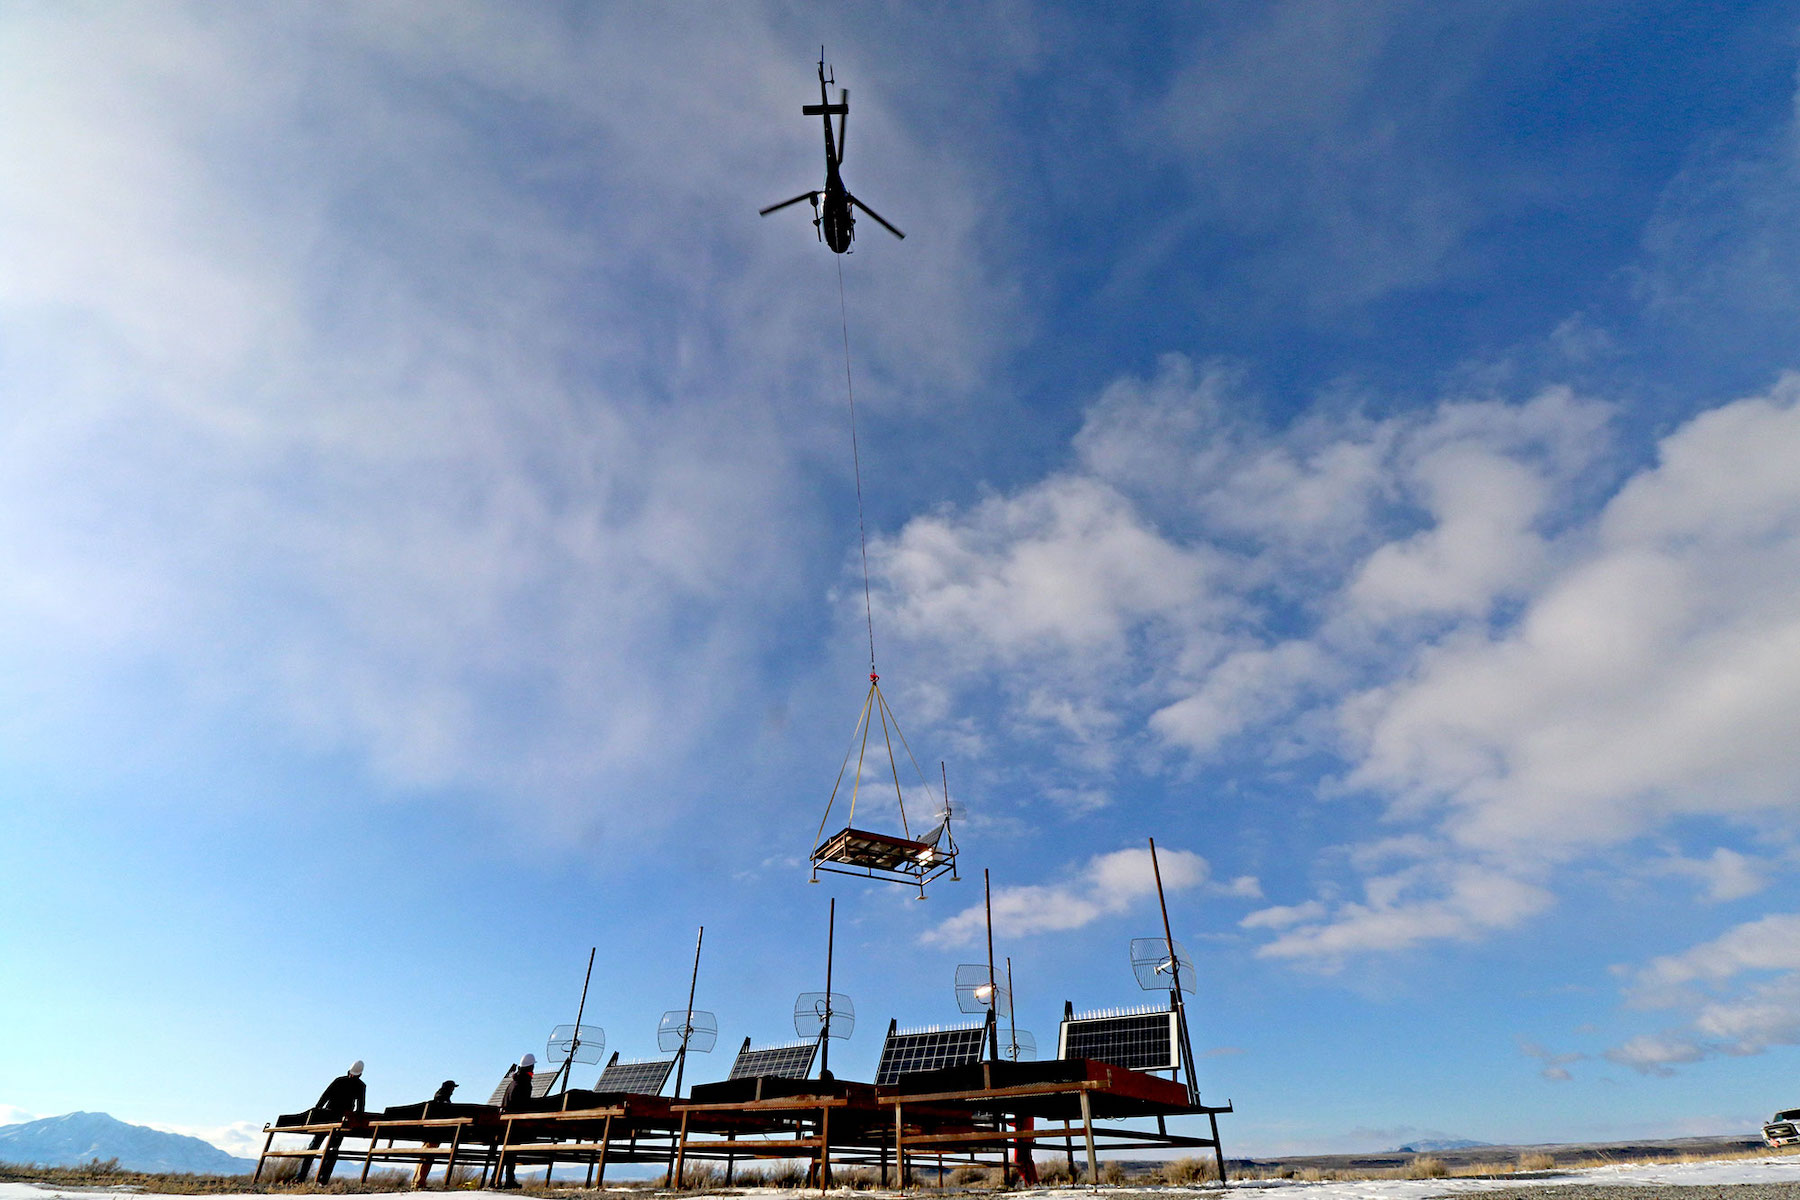 Helicopters lowering cosmic ray detectors.